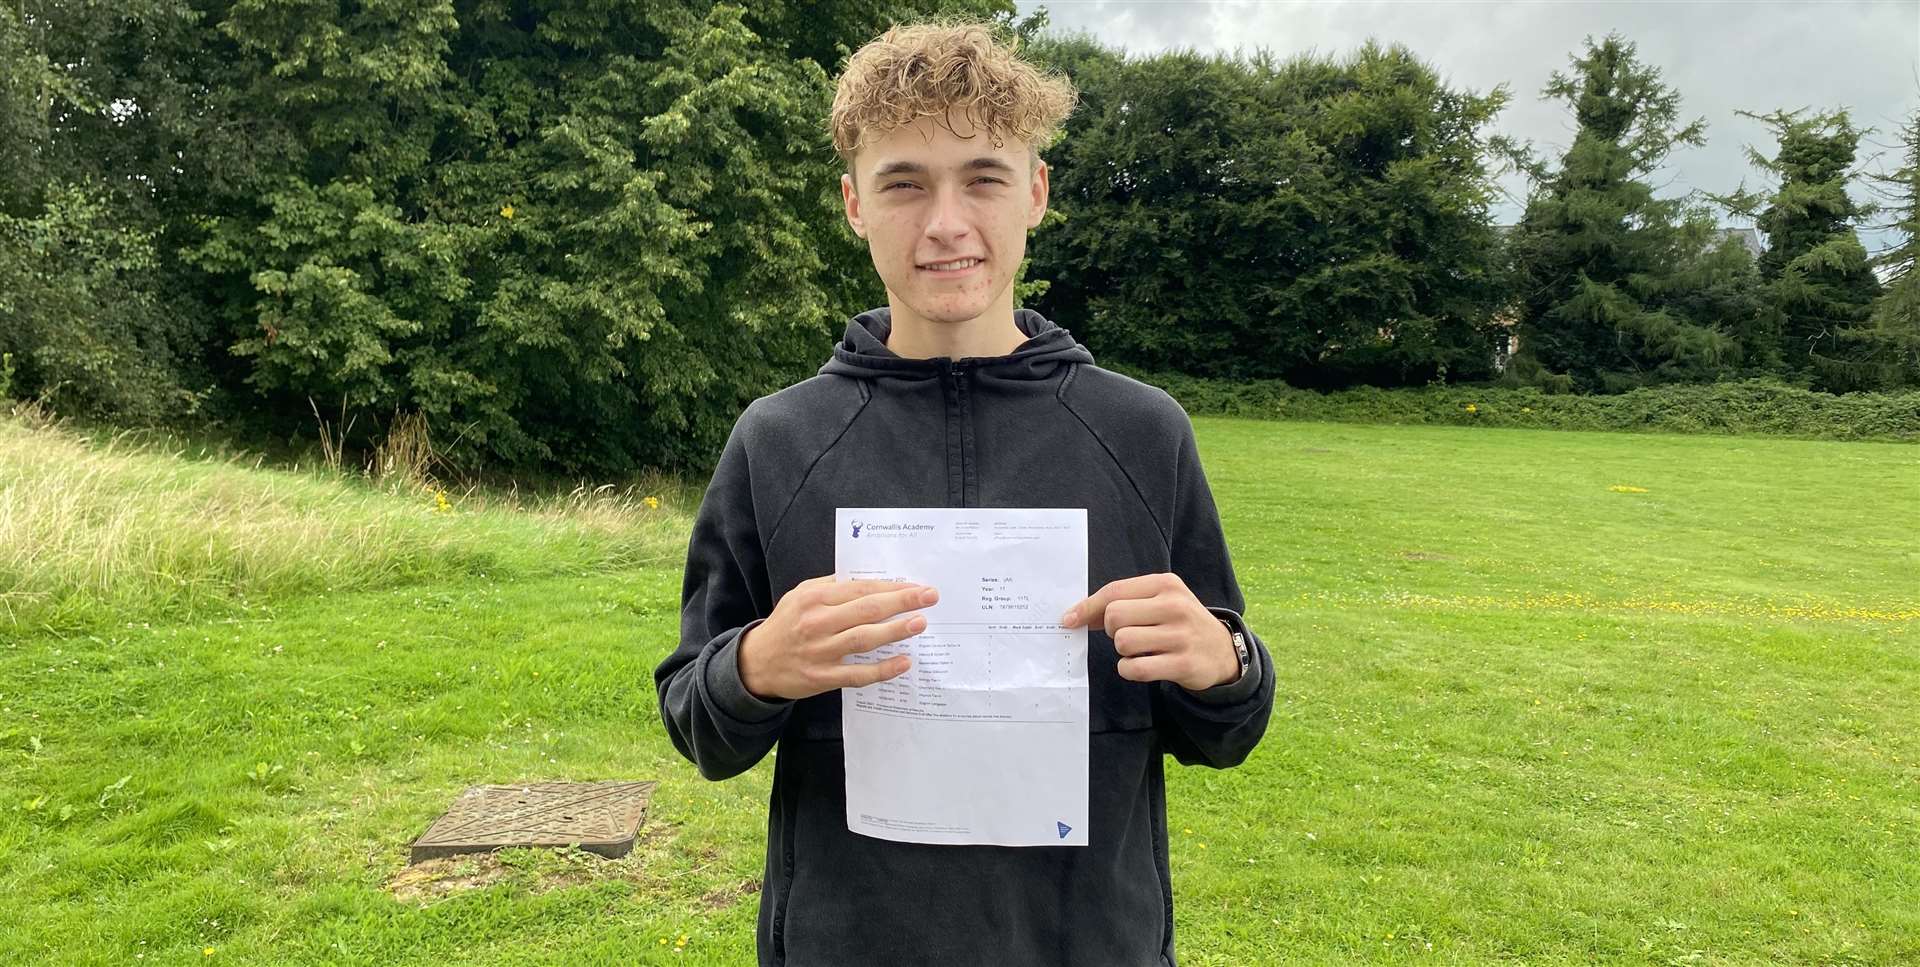 Alfie Sanders achieved one 9, one Distinction*, two 8s, four 7s, and one 6